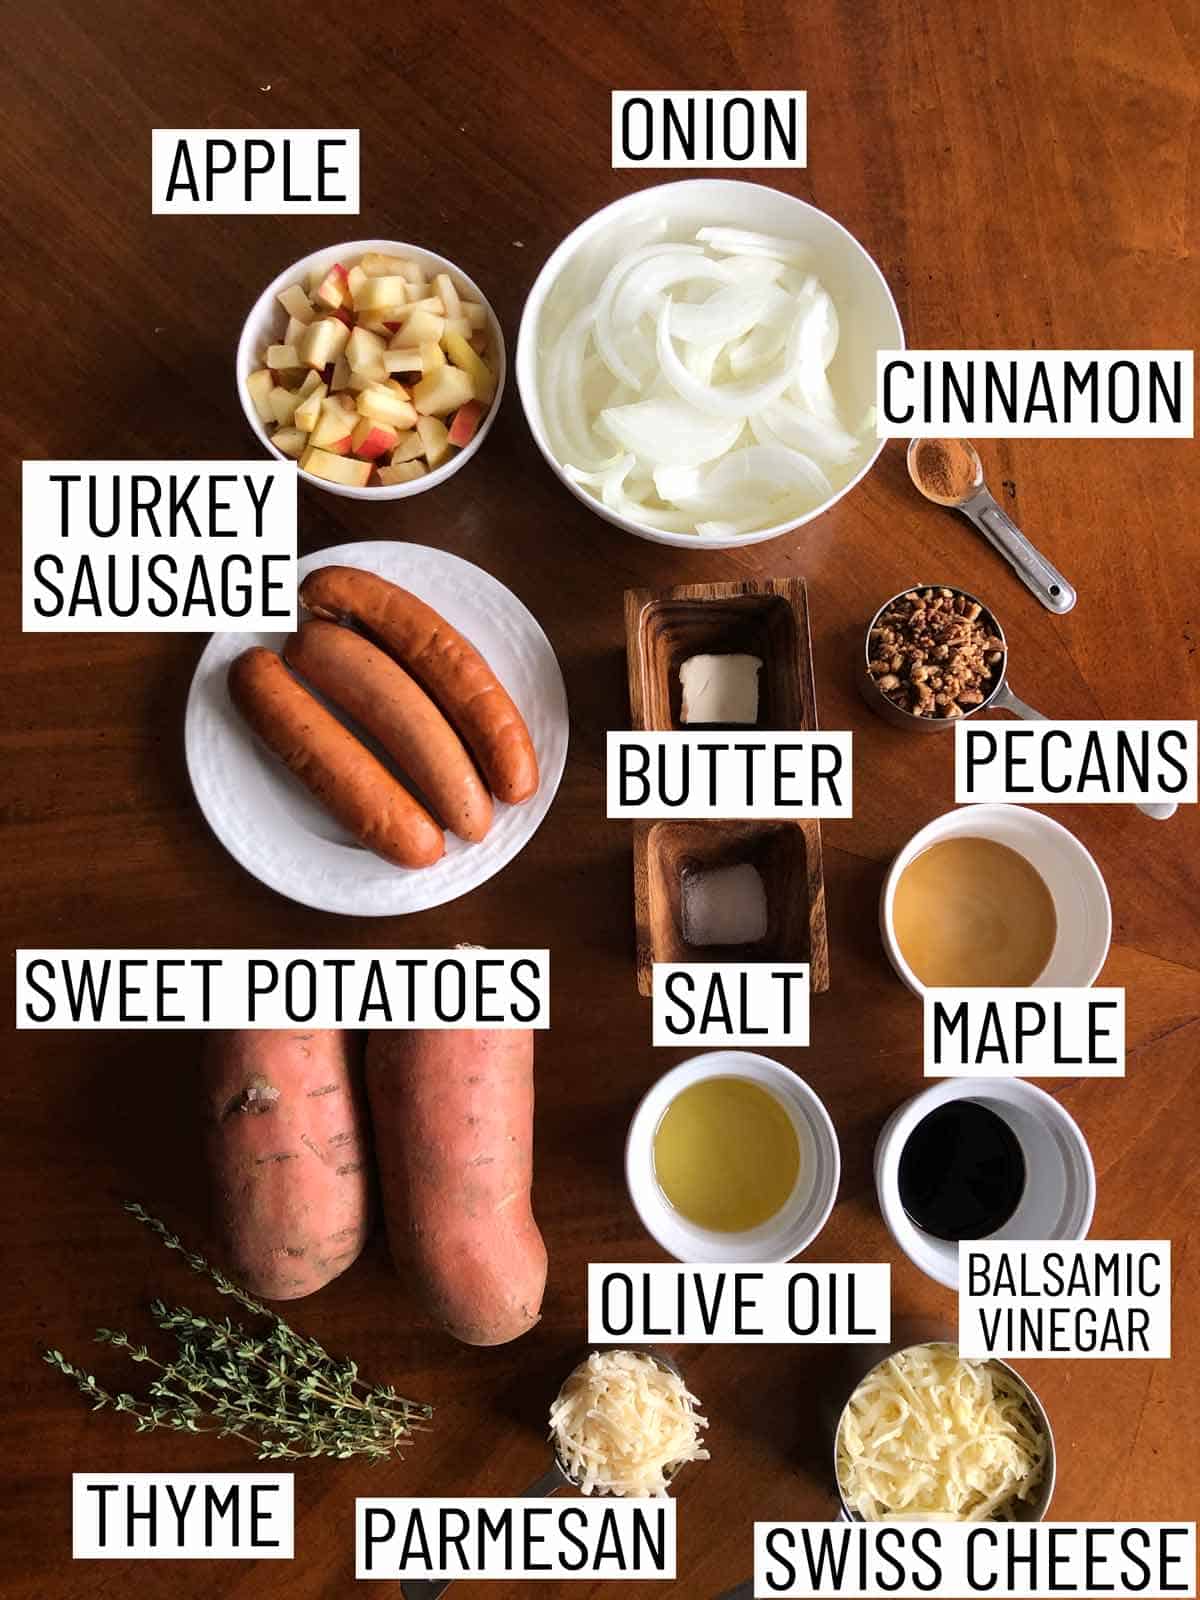 Overhead image of ingredients to make recipe.